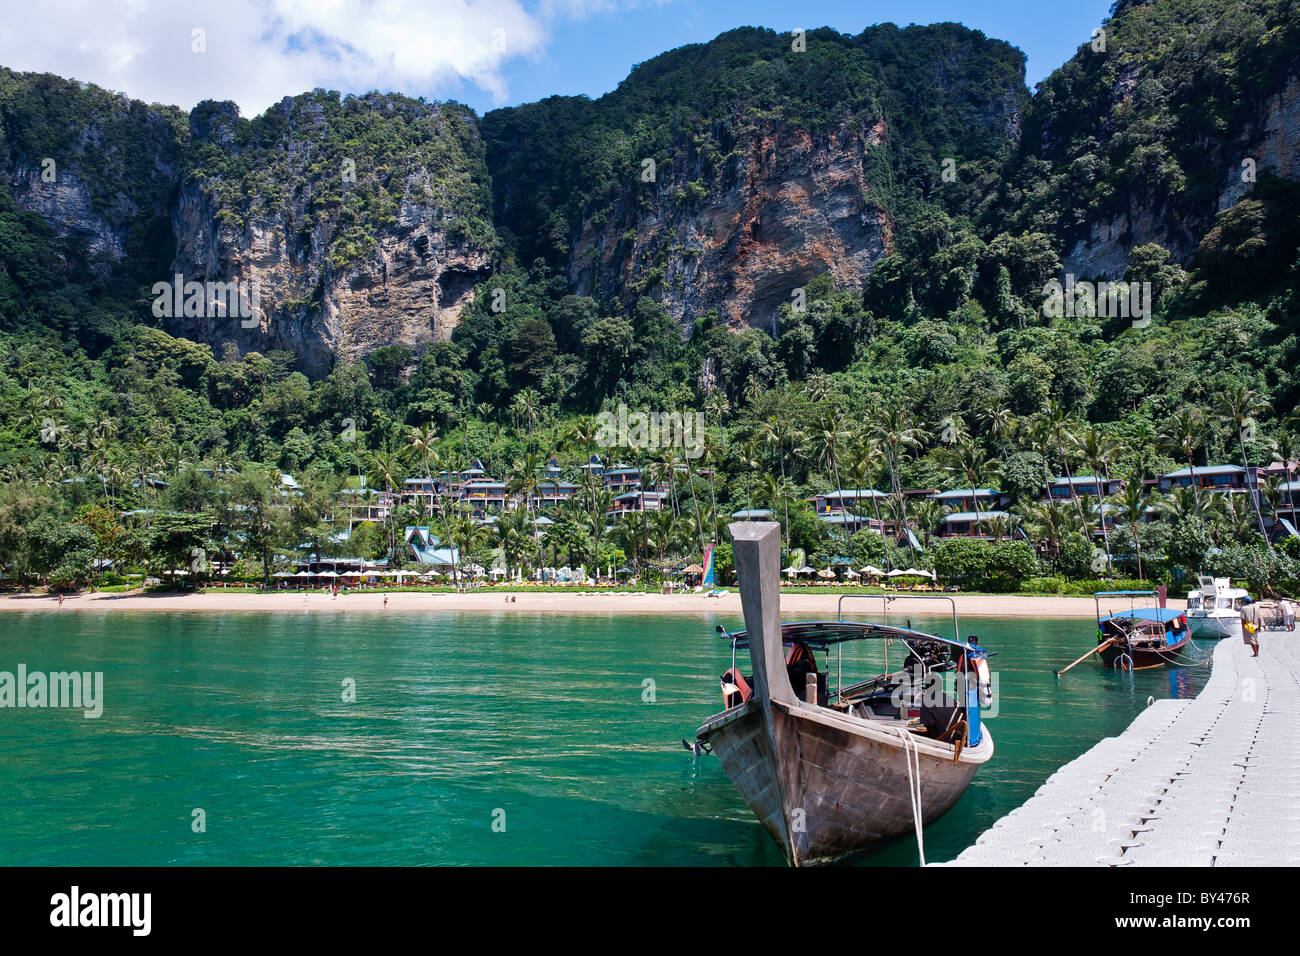 A Longtail boat moored at a pontoon with beach and rain forest in the background Stock Photo